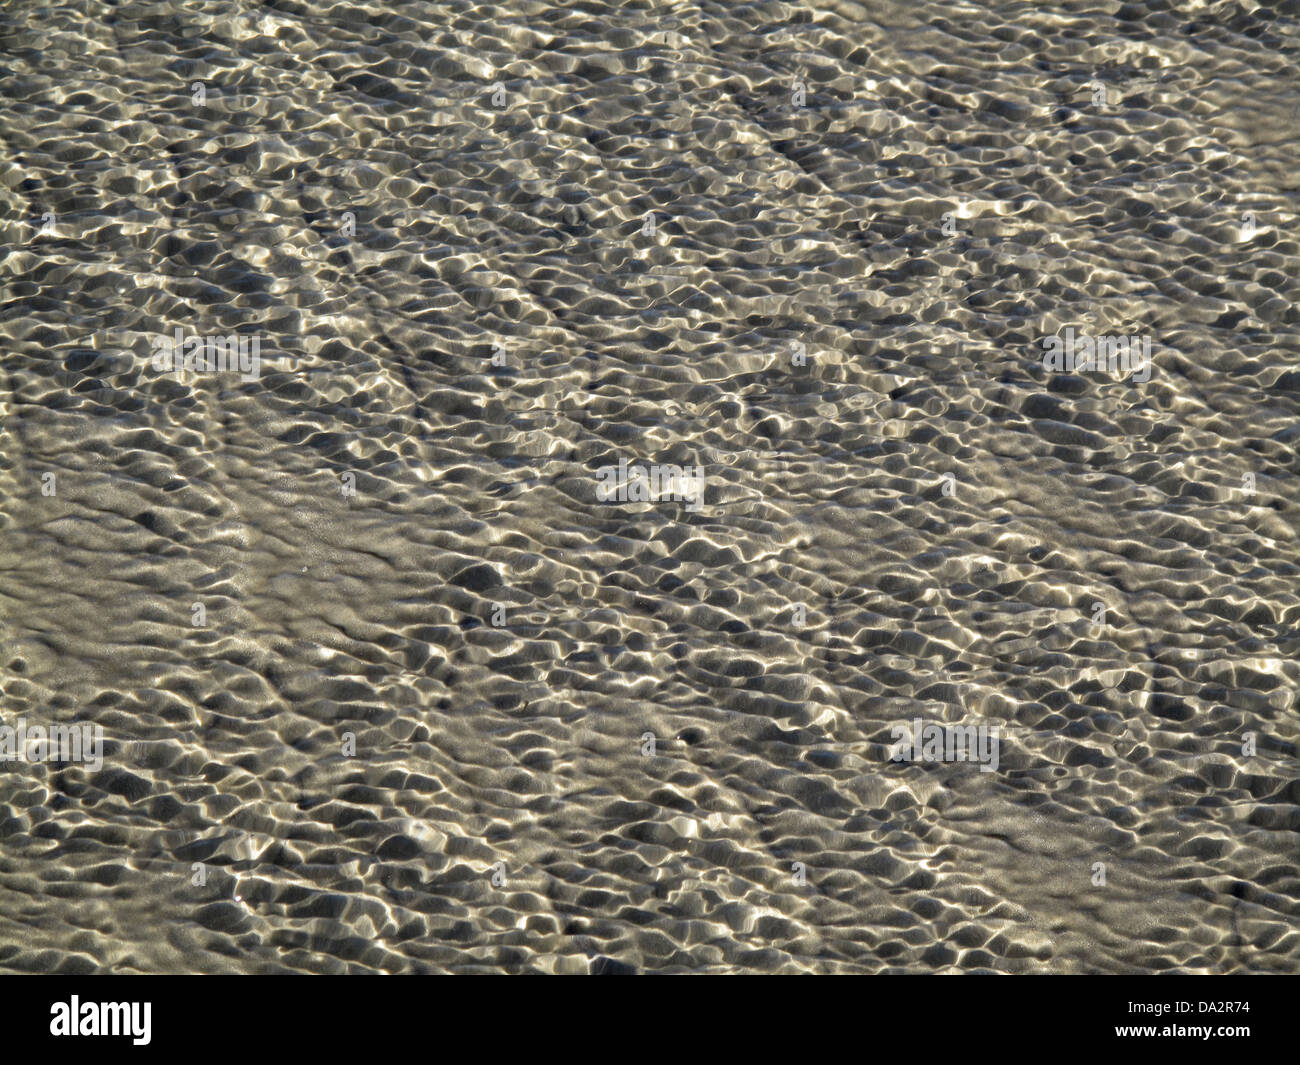 Random, abstract patterns created by the tide on the sands of Worthing Beach, West Sussex, UK Stock Photo